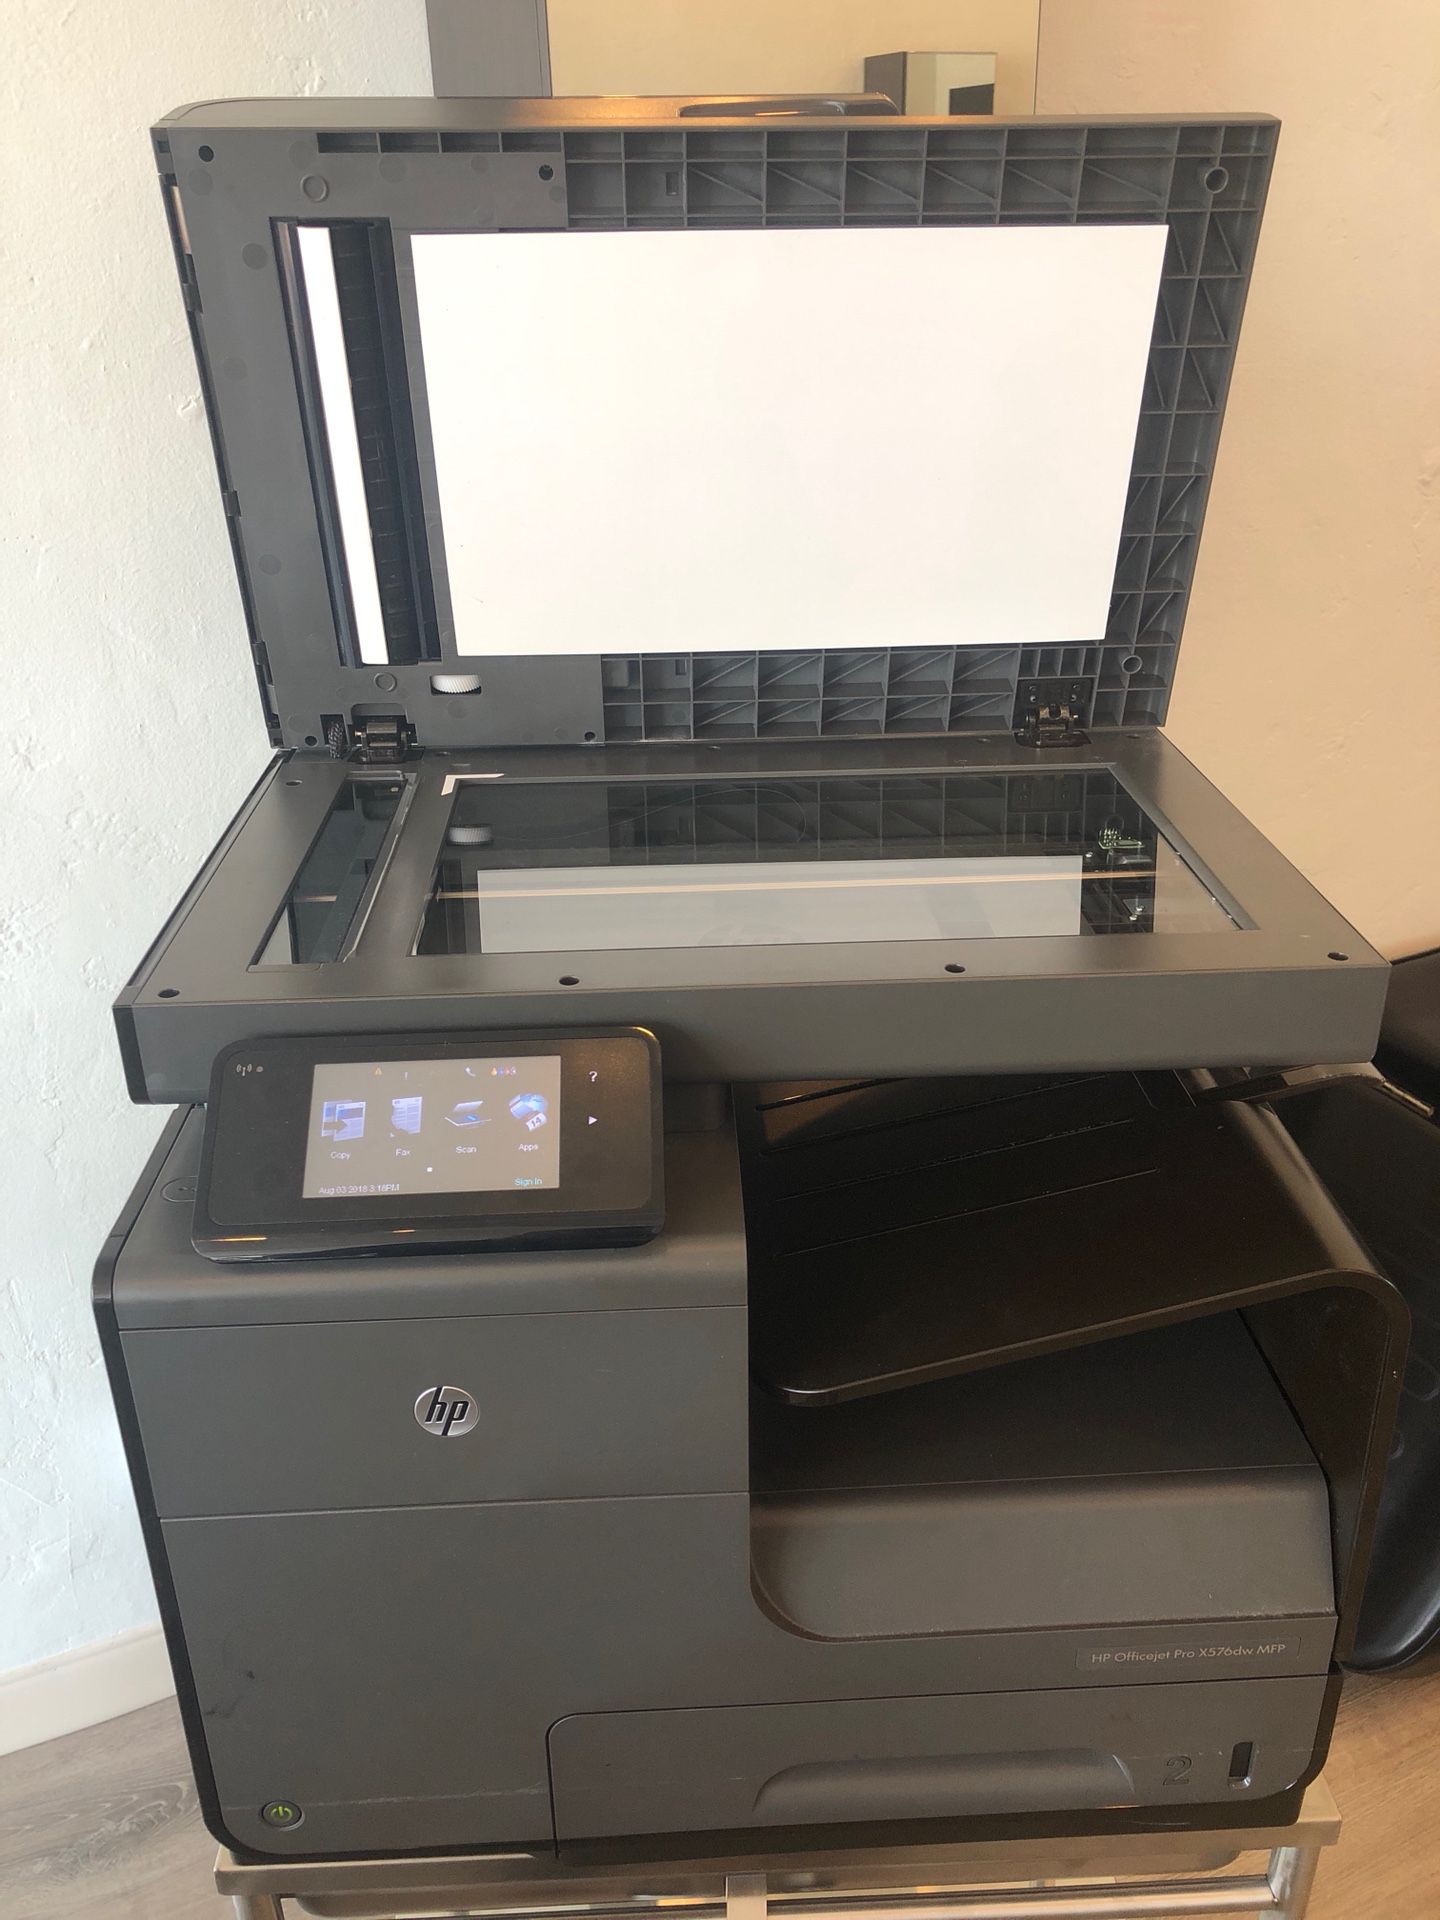 HP OFFICEJET MFP Printer Scanner Fax Copier for in San Diego, CA - OfferUp